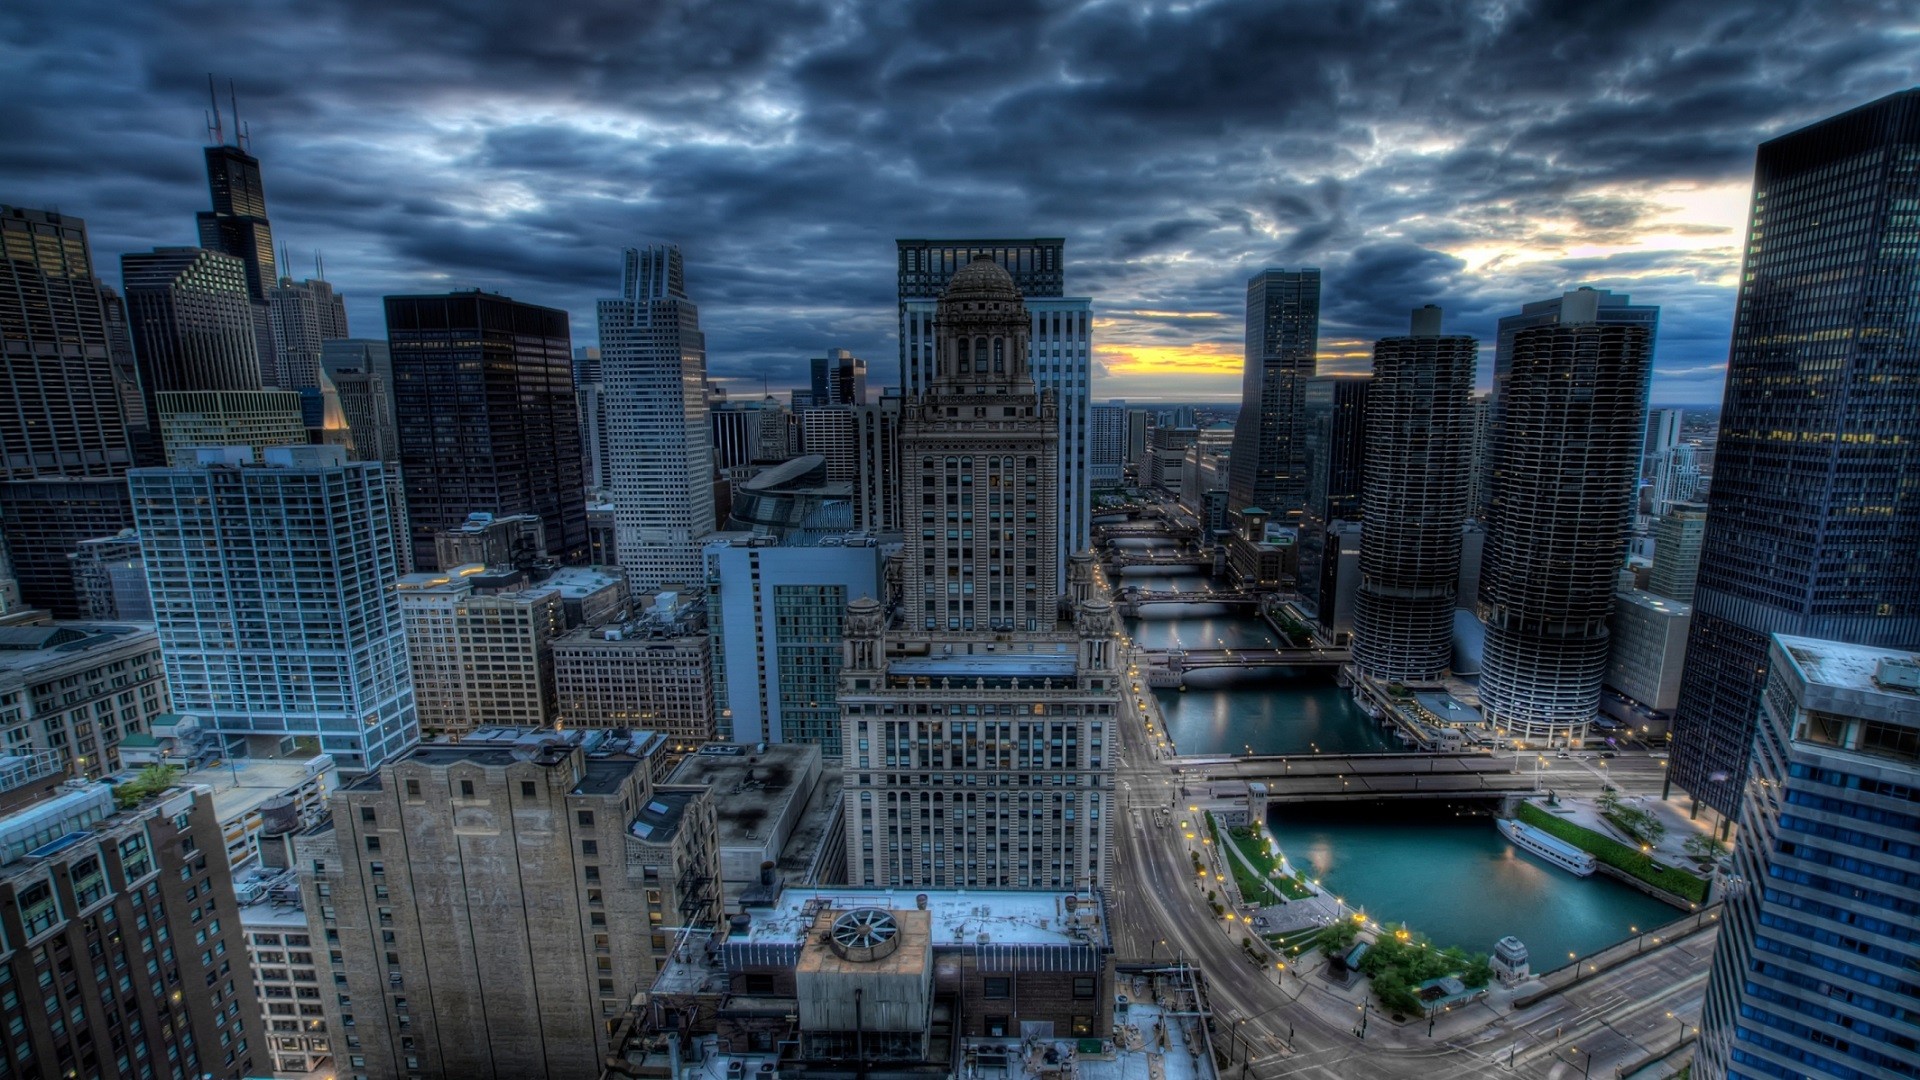 General 1920x1080 city Chicago building architecture USA sky clouds